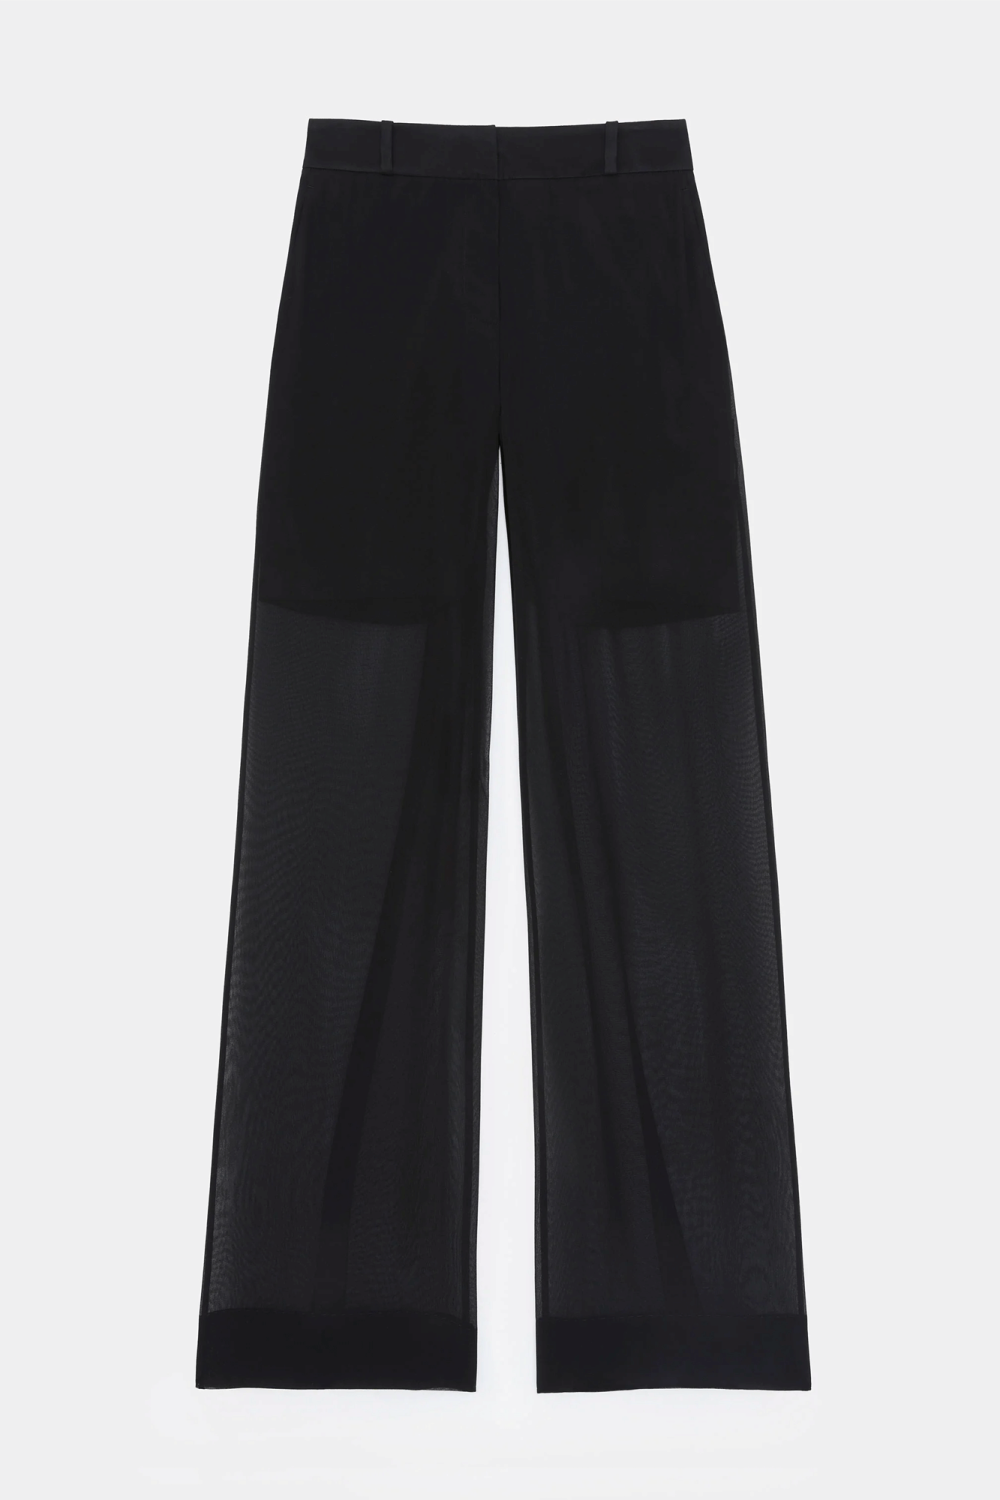 Bring timeless sophistication to your wardrobe with the Sullivan Pant from Lafayette 148. 